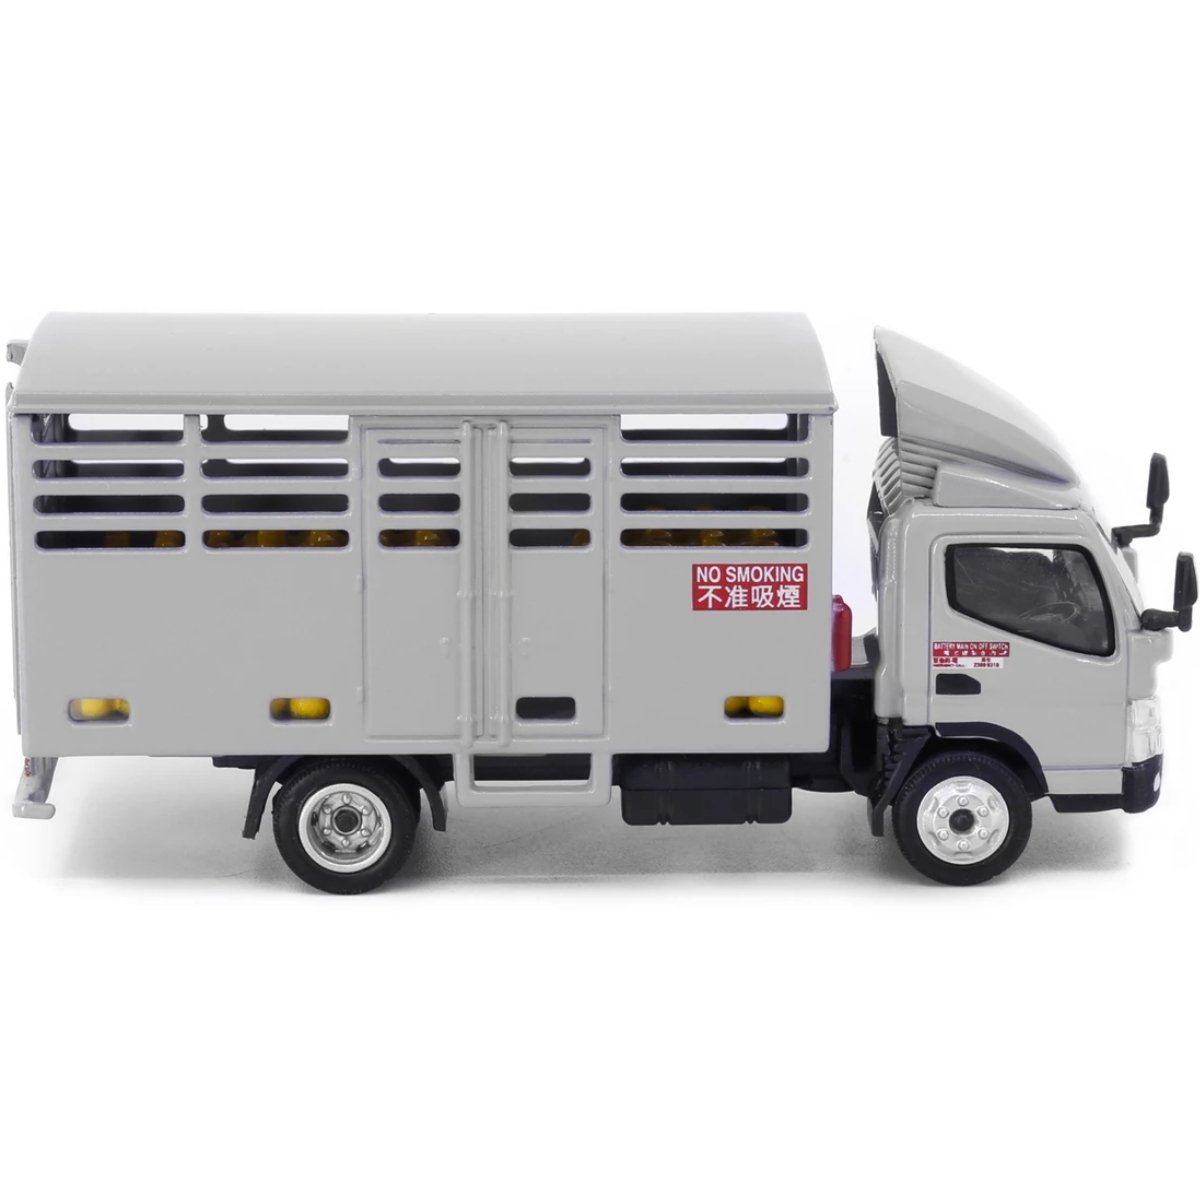 Tiny Models Mitsubishi Fuso Canter Bottled LPG Delivery Lorry (1:76 Scale) - Phillips Hobbies